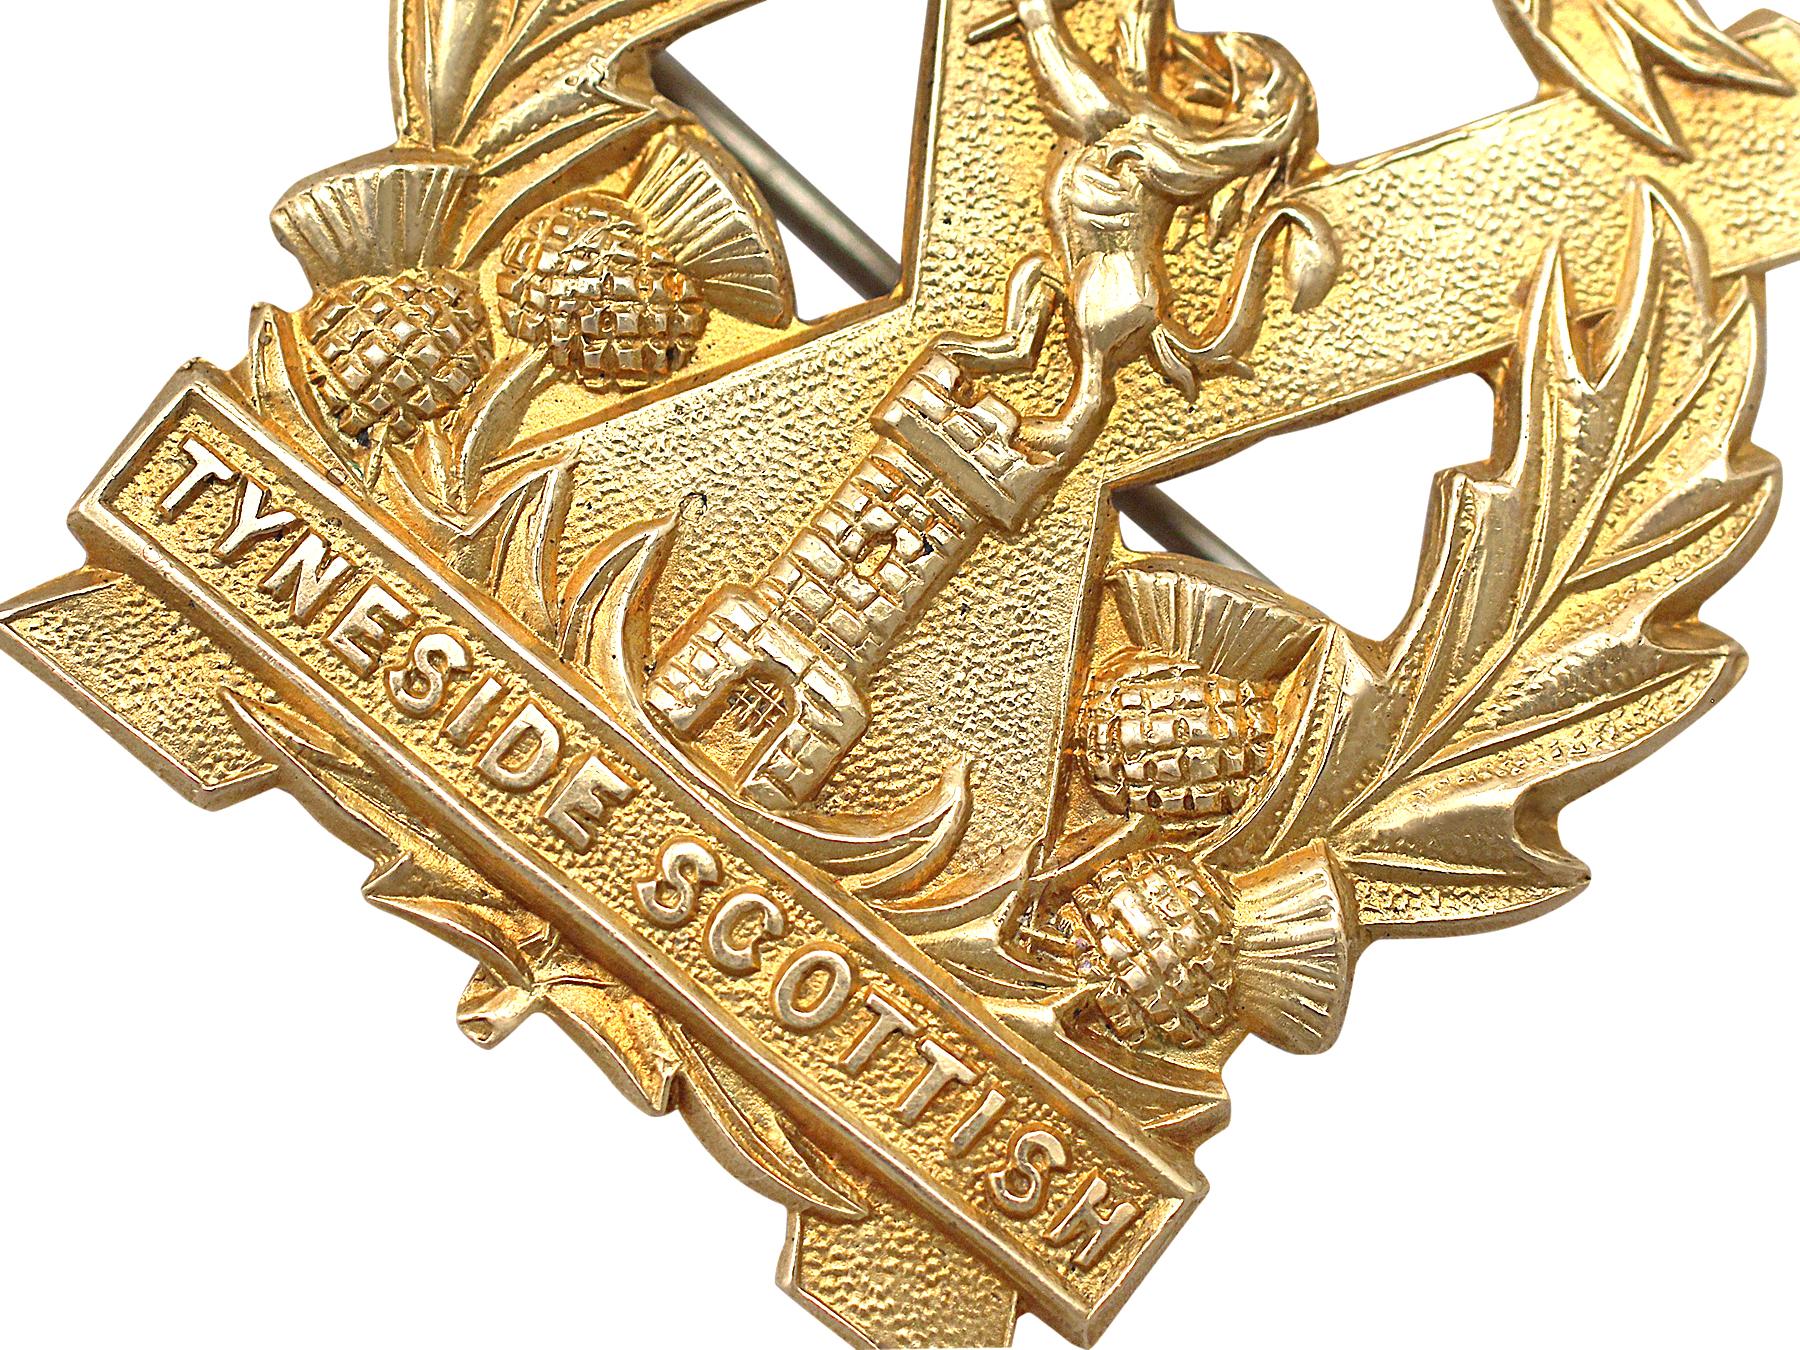 A fine and impressive 18 karat yellow gold 'Tyneside Scottish Brigade' regimental brooch made by Thomas L Mott; part of our diverse antique jewelry and estate jewelry collections

This antique World War I (WWI) regimental brooch has been crafted in